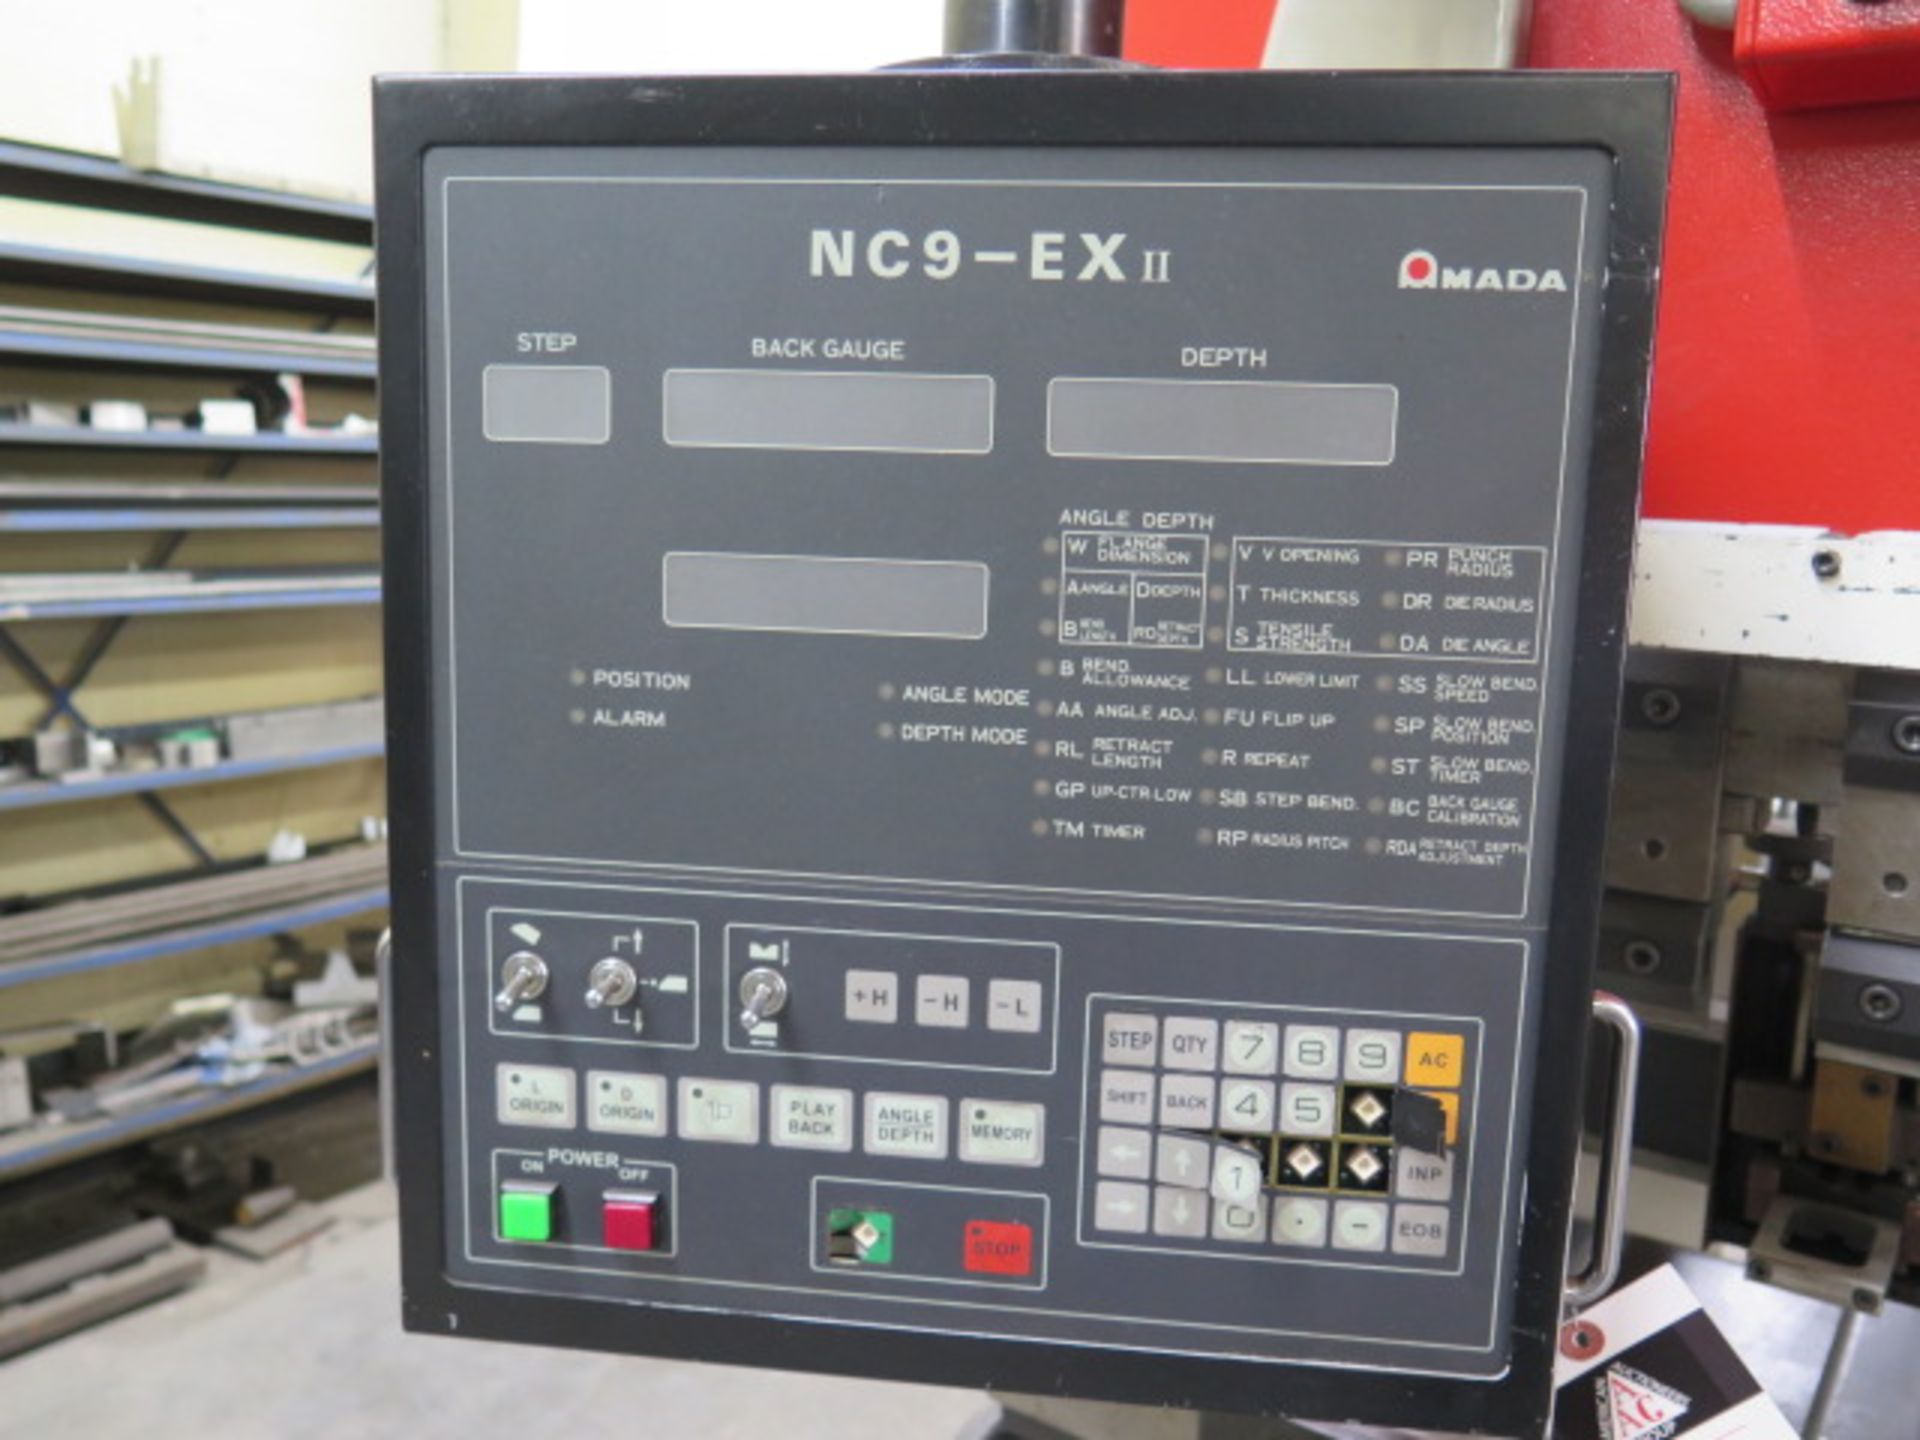 Amada RG100 100 Ton x 10’ CNC Press Brake s/n 105240 w/ NC9-EX II 3 AXIS Controls, SOLD AS IS - Image 12 of 20